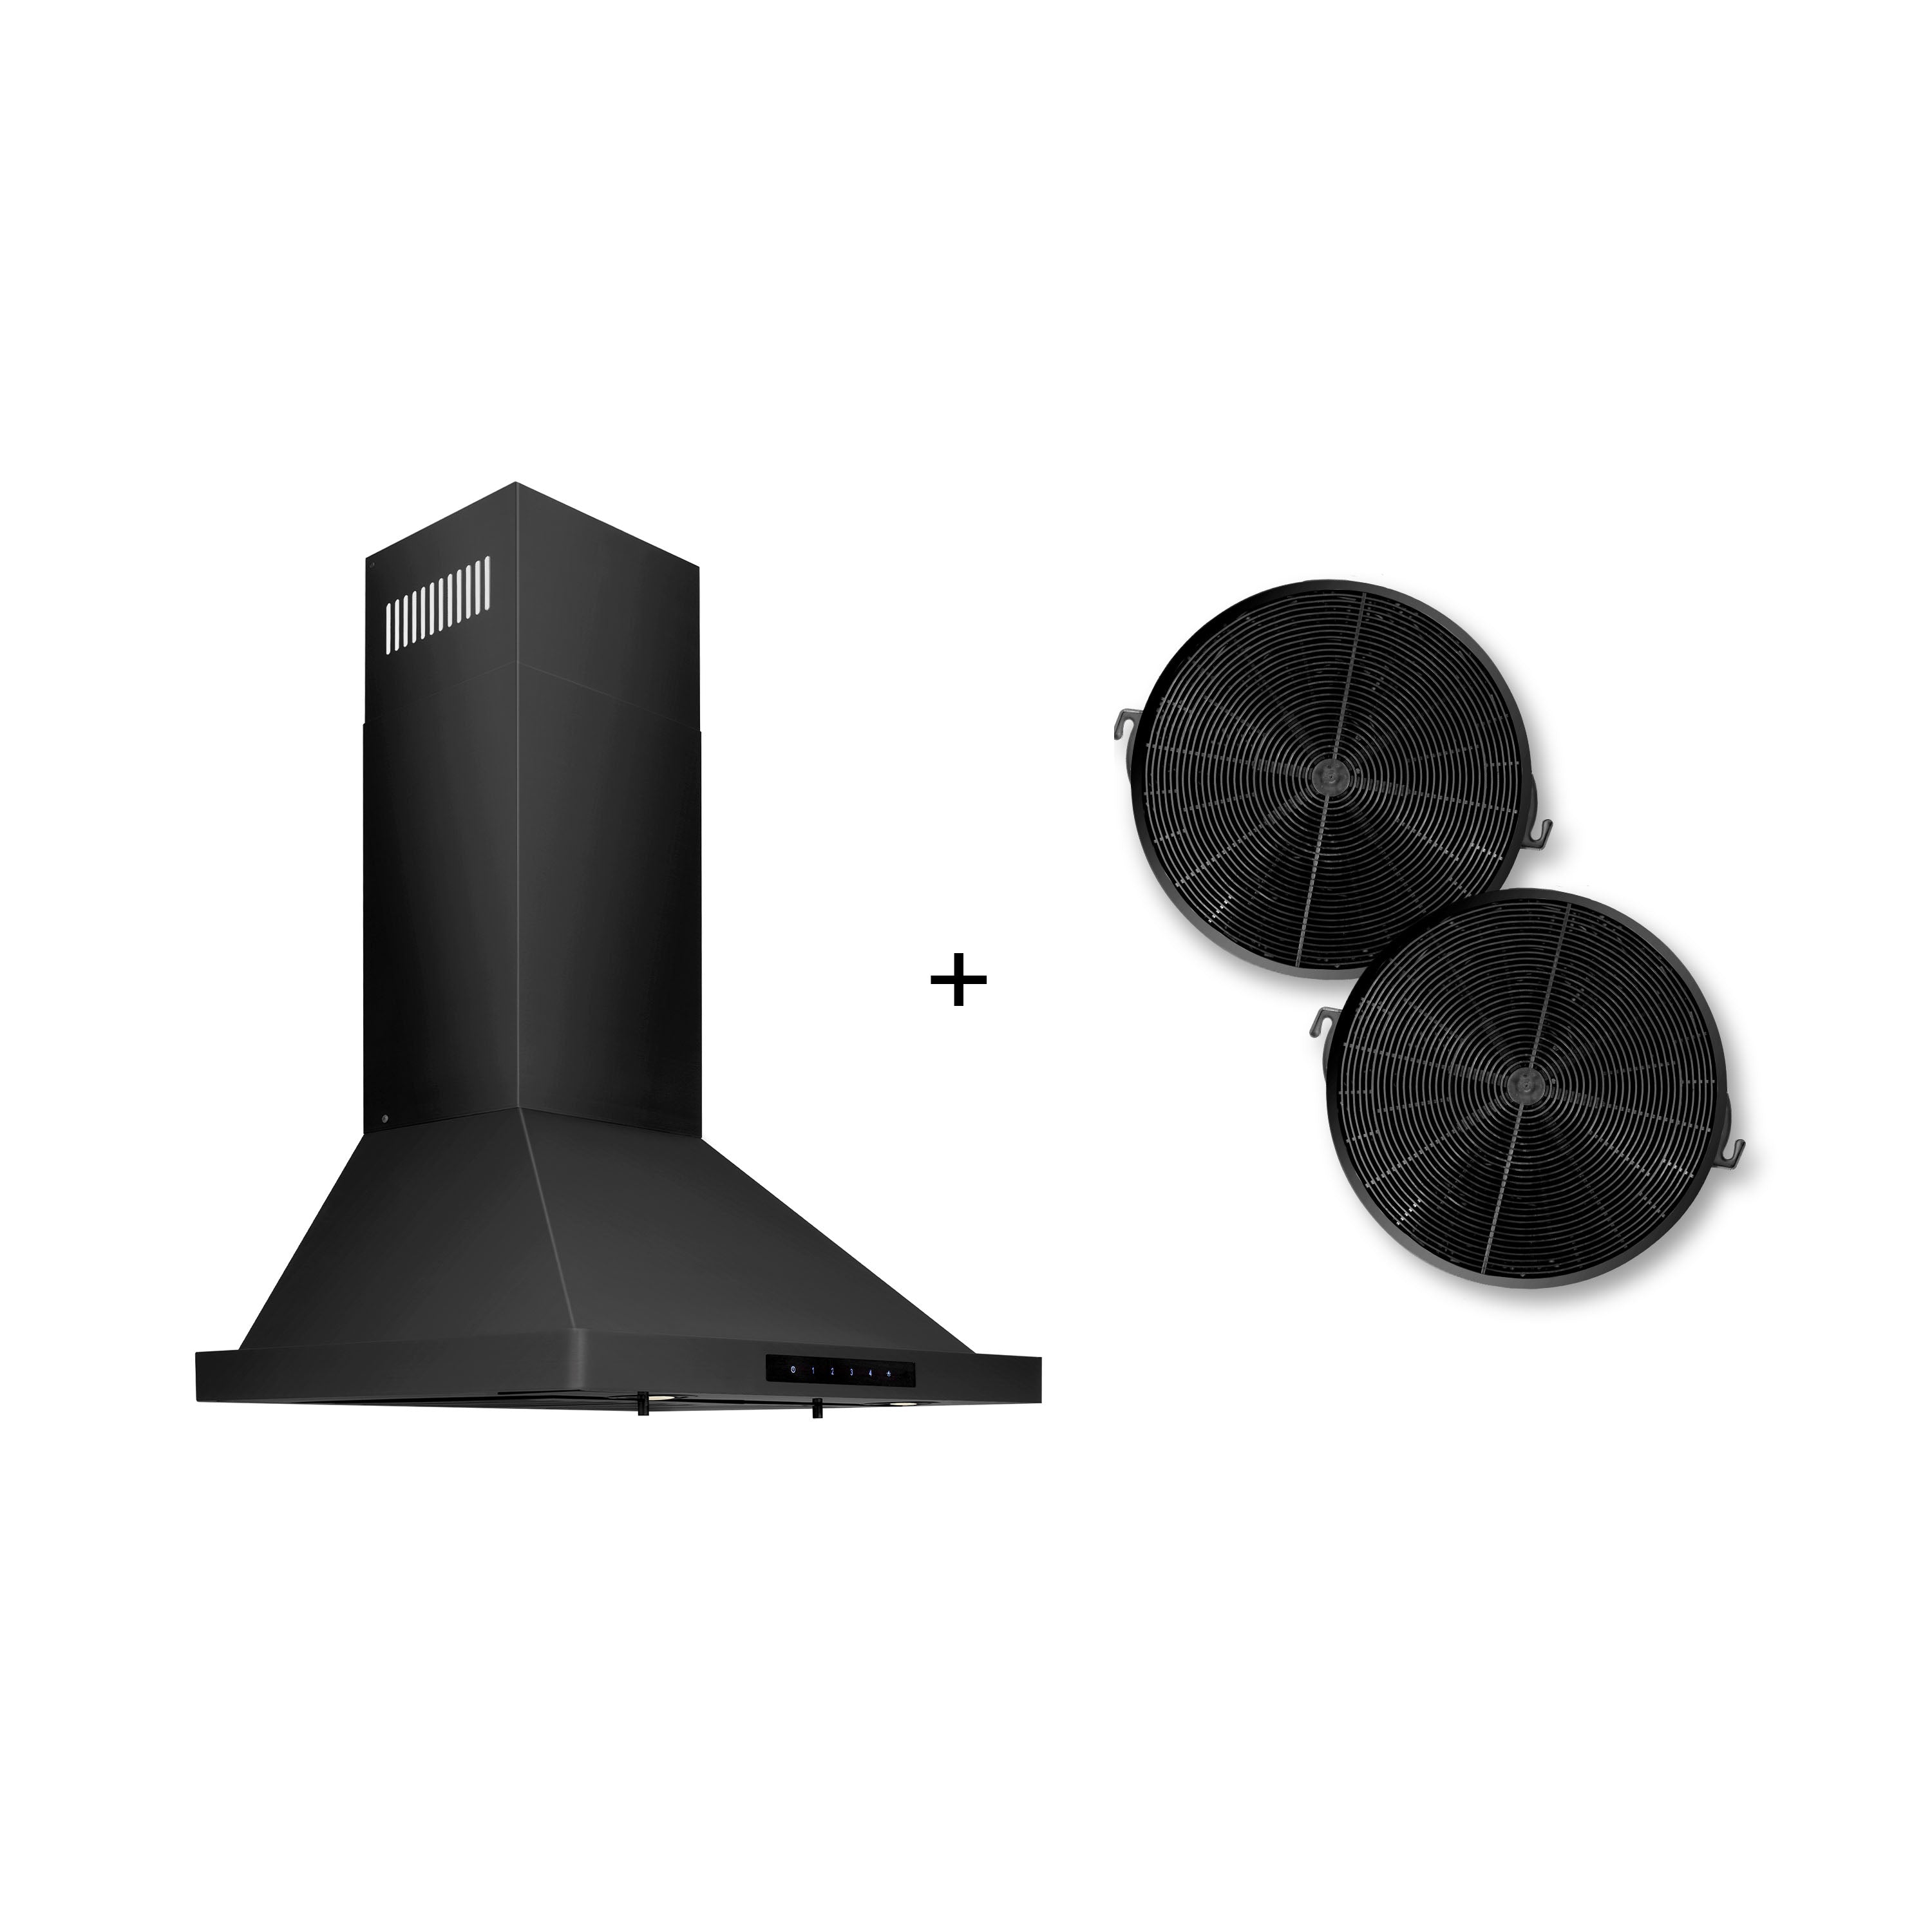 ZLINE 24" Convertible Wall Mount Range Hood in Black Stainless Steel with Set of 2 Charcoal Filters, LED lighting and Dishwasher-Safe Baffle Filters (BSKBN-CF-24)